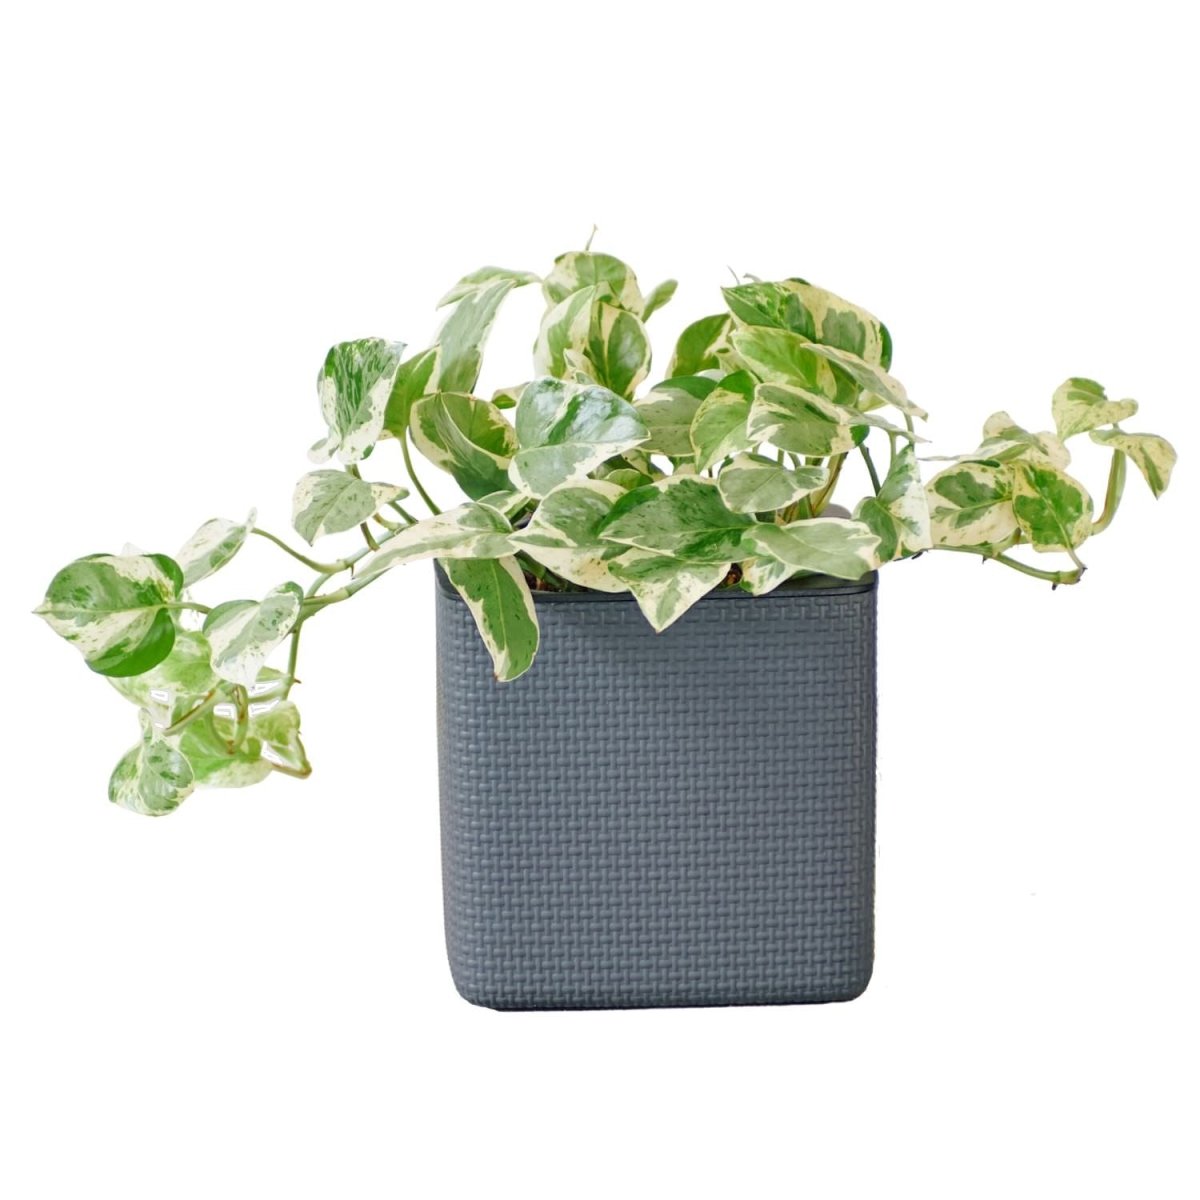 Pothos Pearls And Jade Placed In Lechuza Cube 16 Planter - Slate - My City Plants